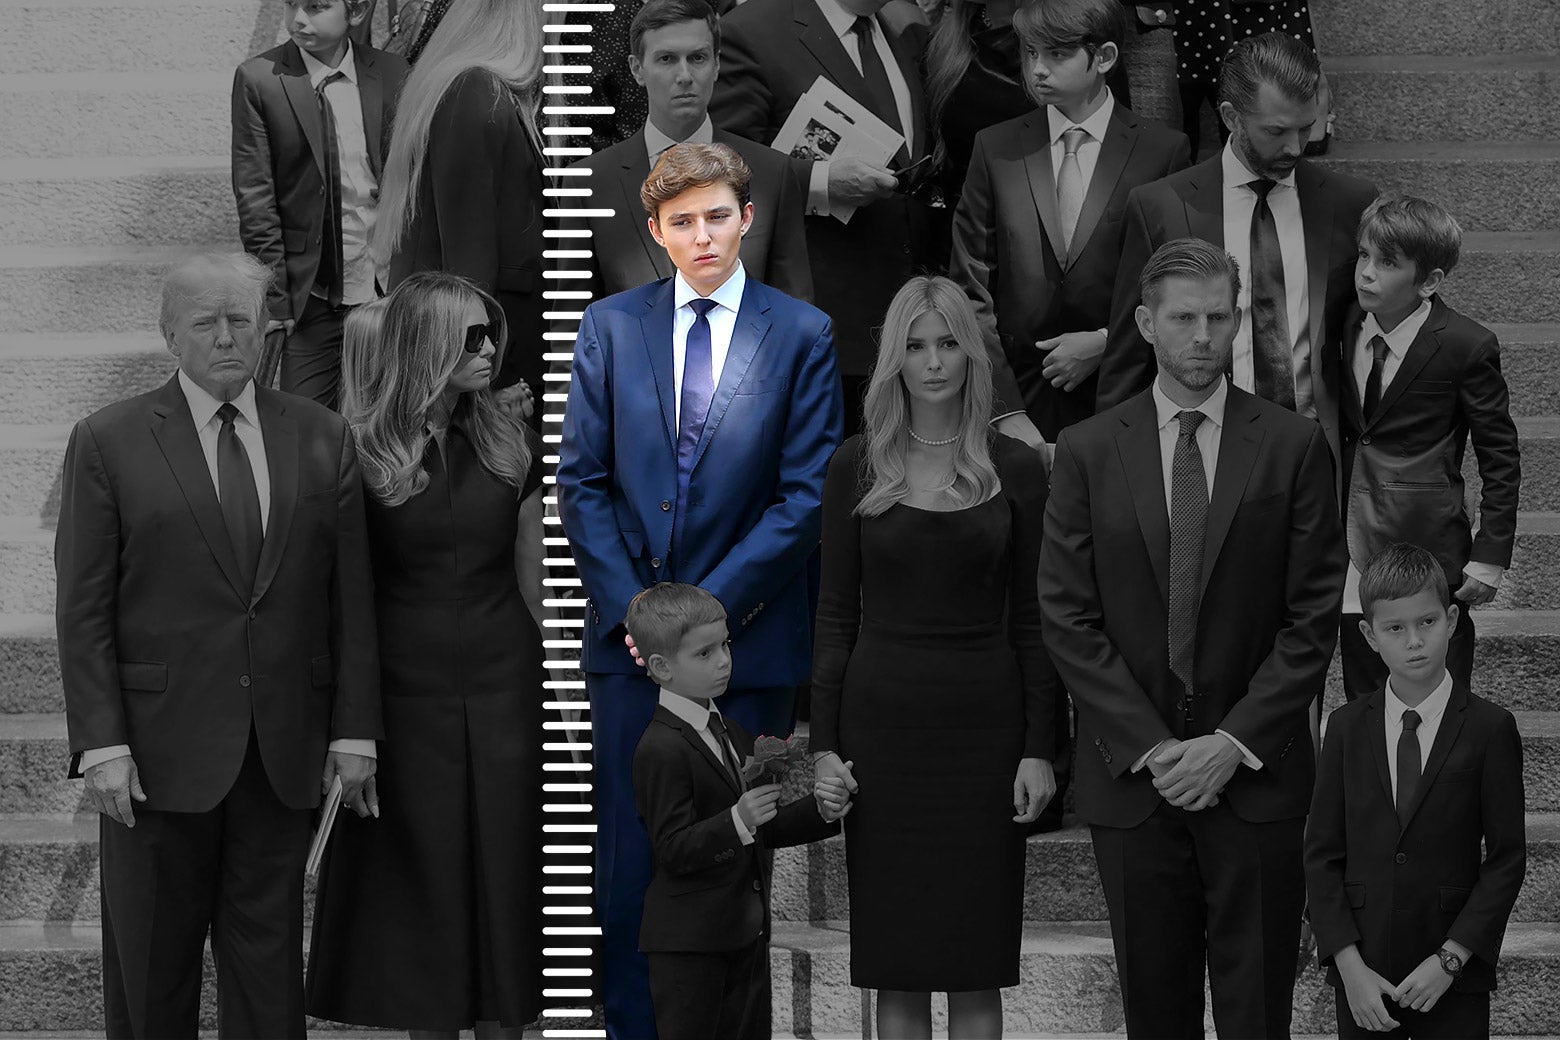 Barron Trump standing with the Trump family in a blue suit with a height measurement to show he is very tall. 